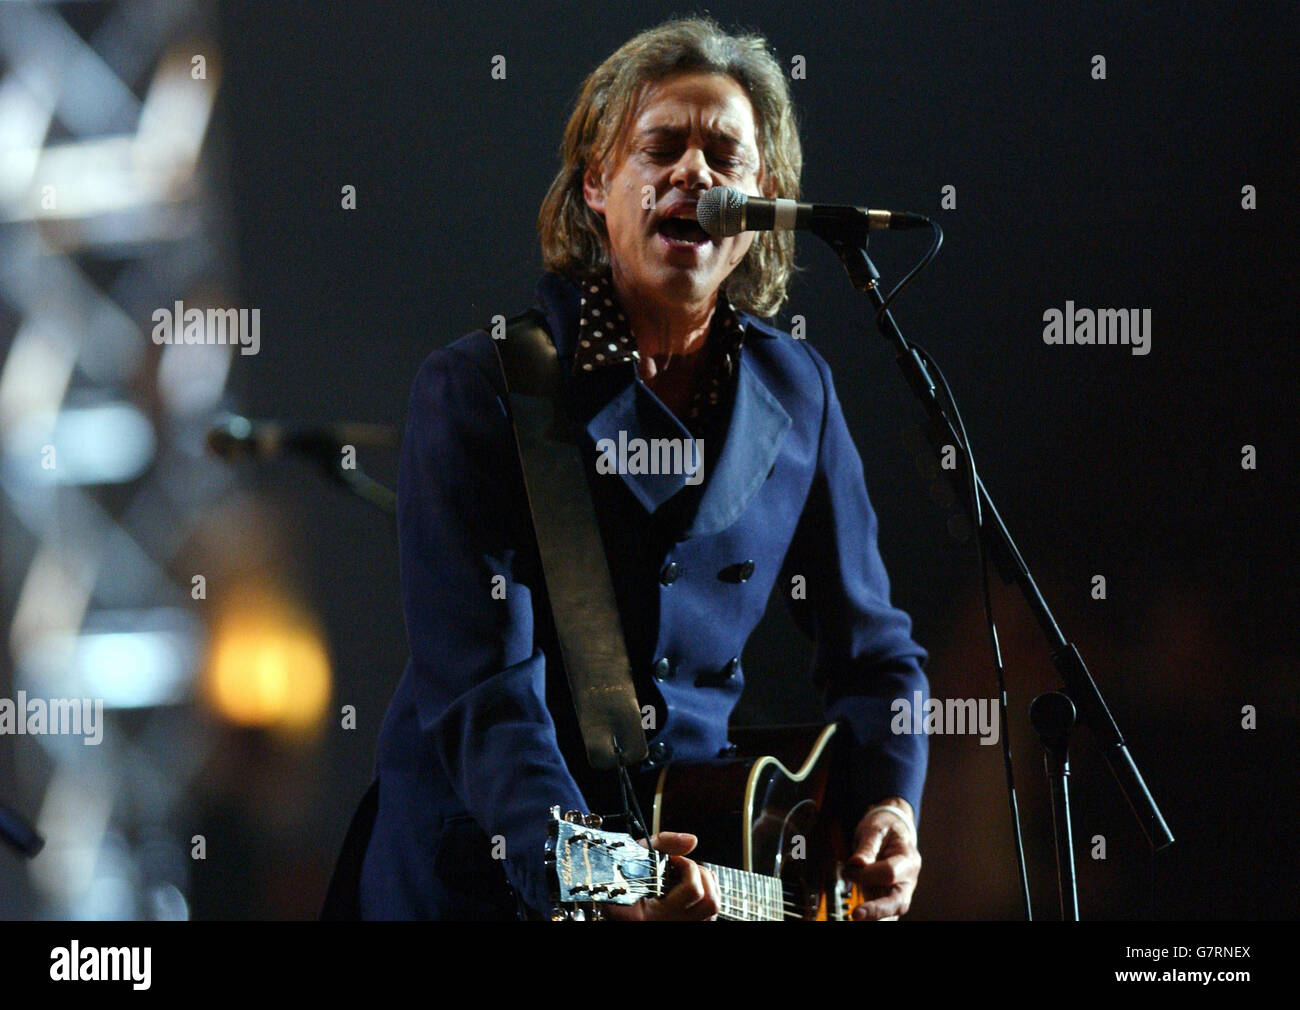 Brit Awards 2005 - Earls Court - On Stage Stock Photo - Alamy